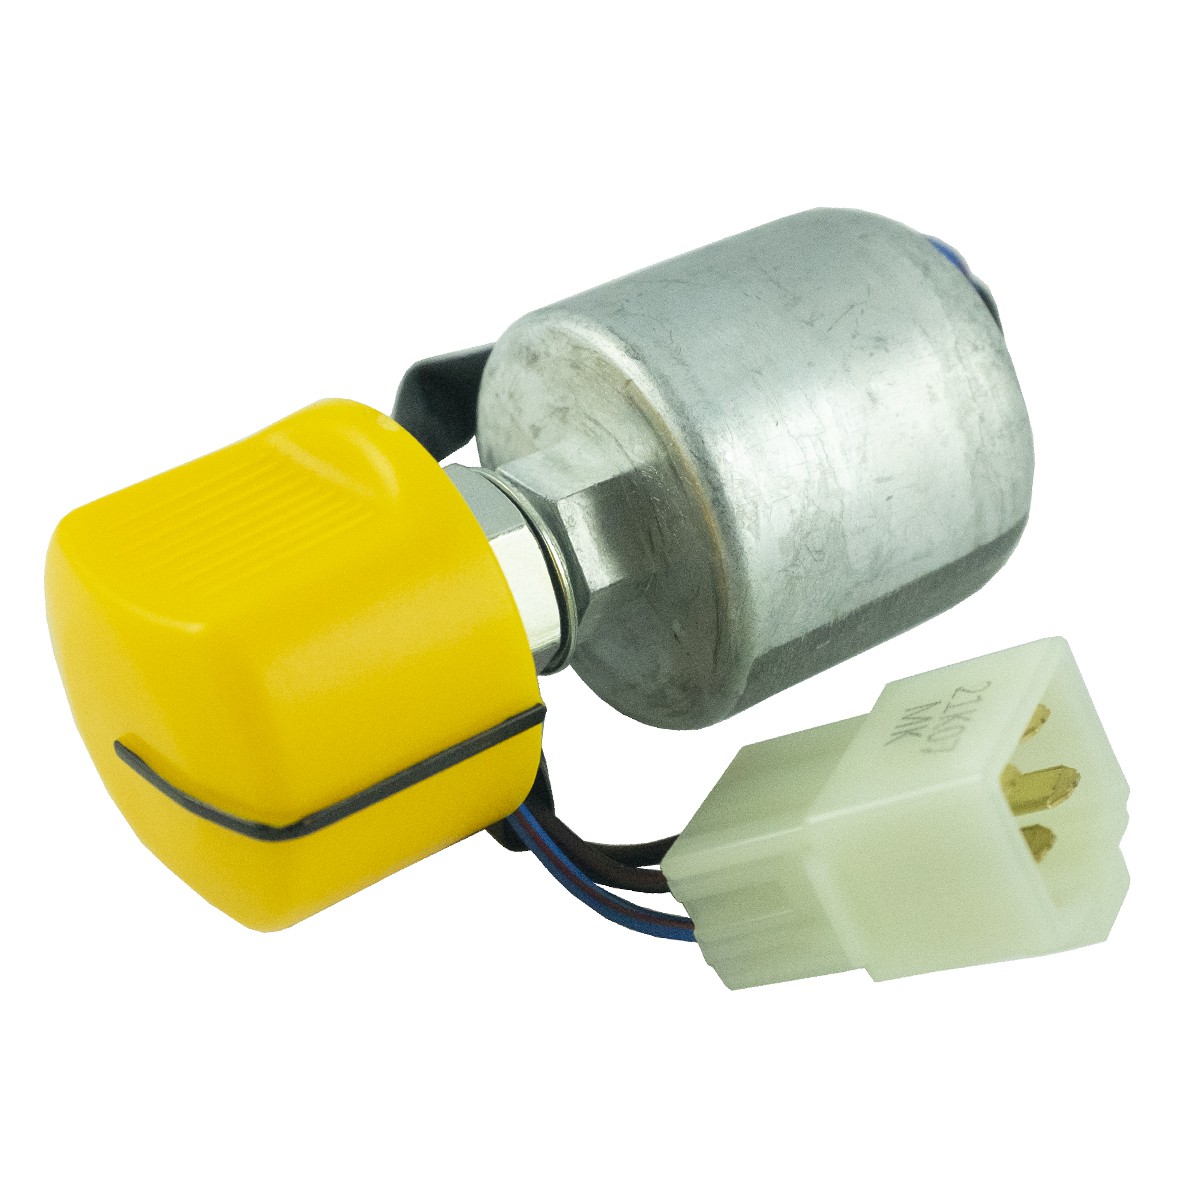 PTO/PTO switch / LS XJ25 / LS MT1.25 / LS MT3.35 / LS MT3.40 / LS MT3.50 / LS MT3.60 / TRG750 / 40339438